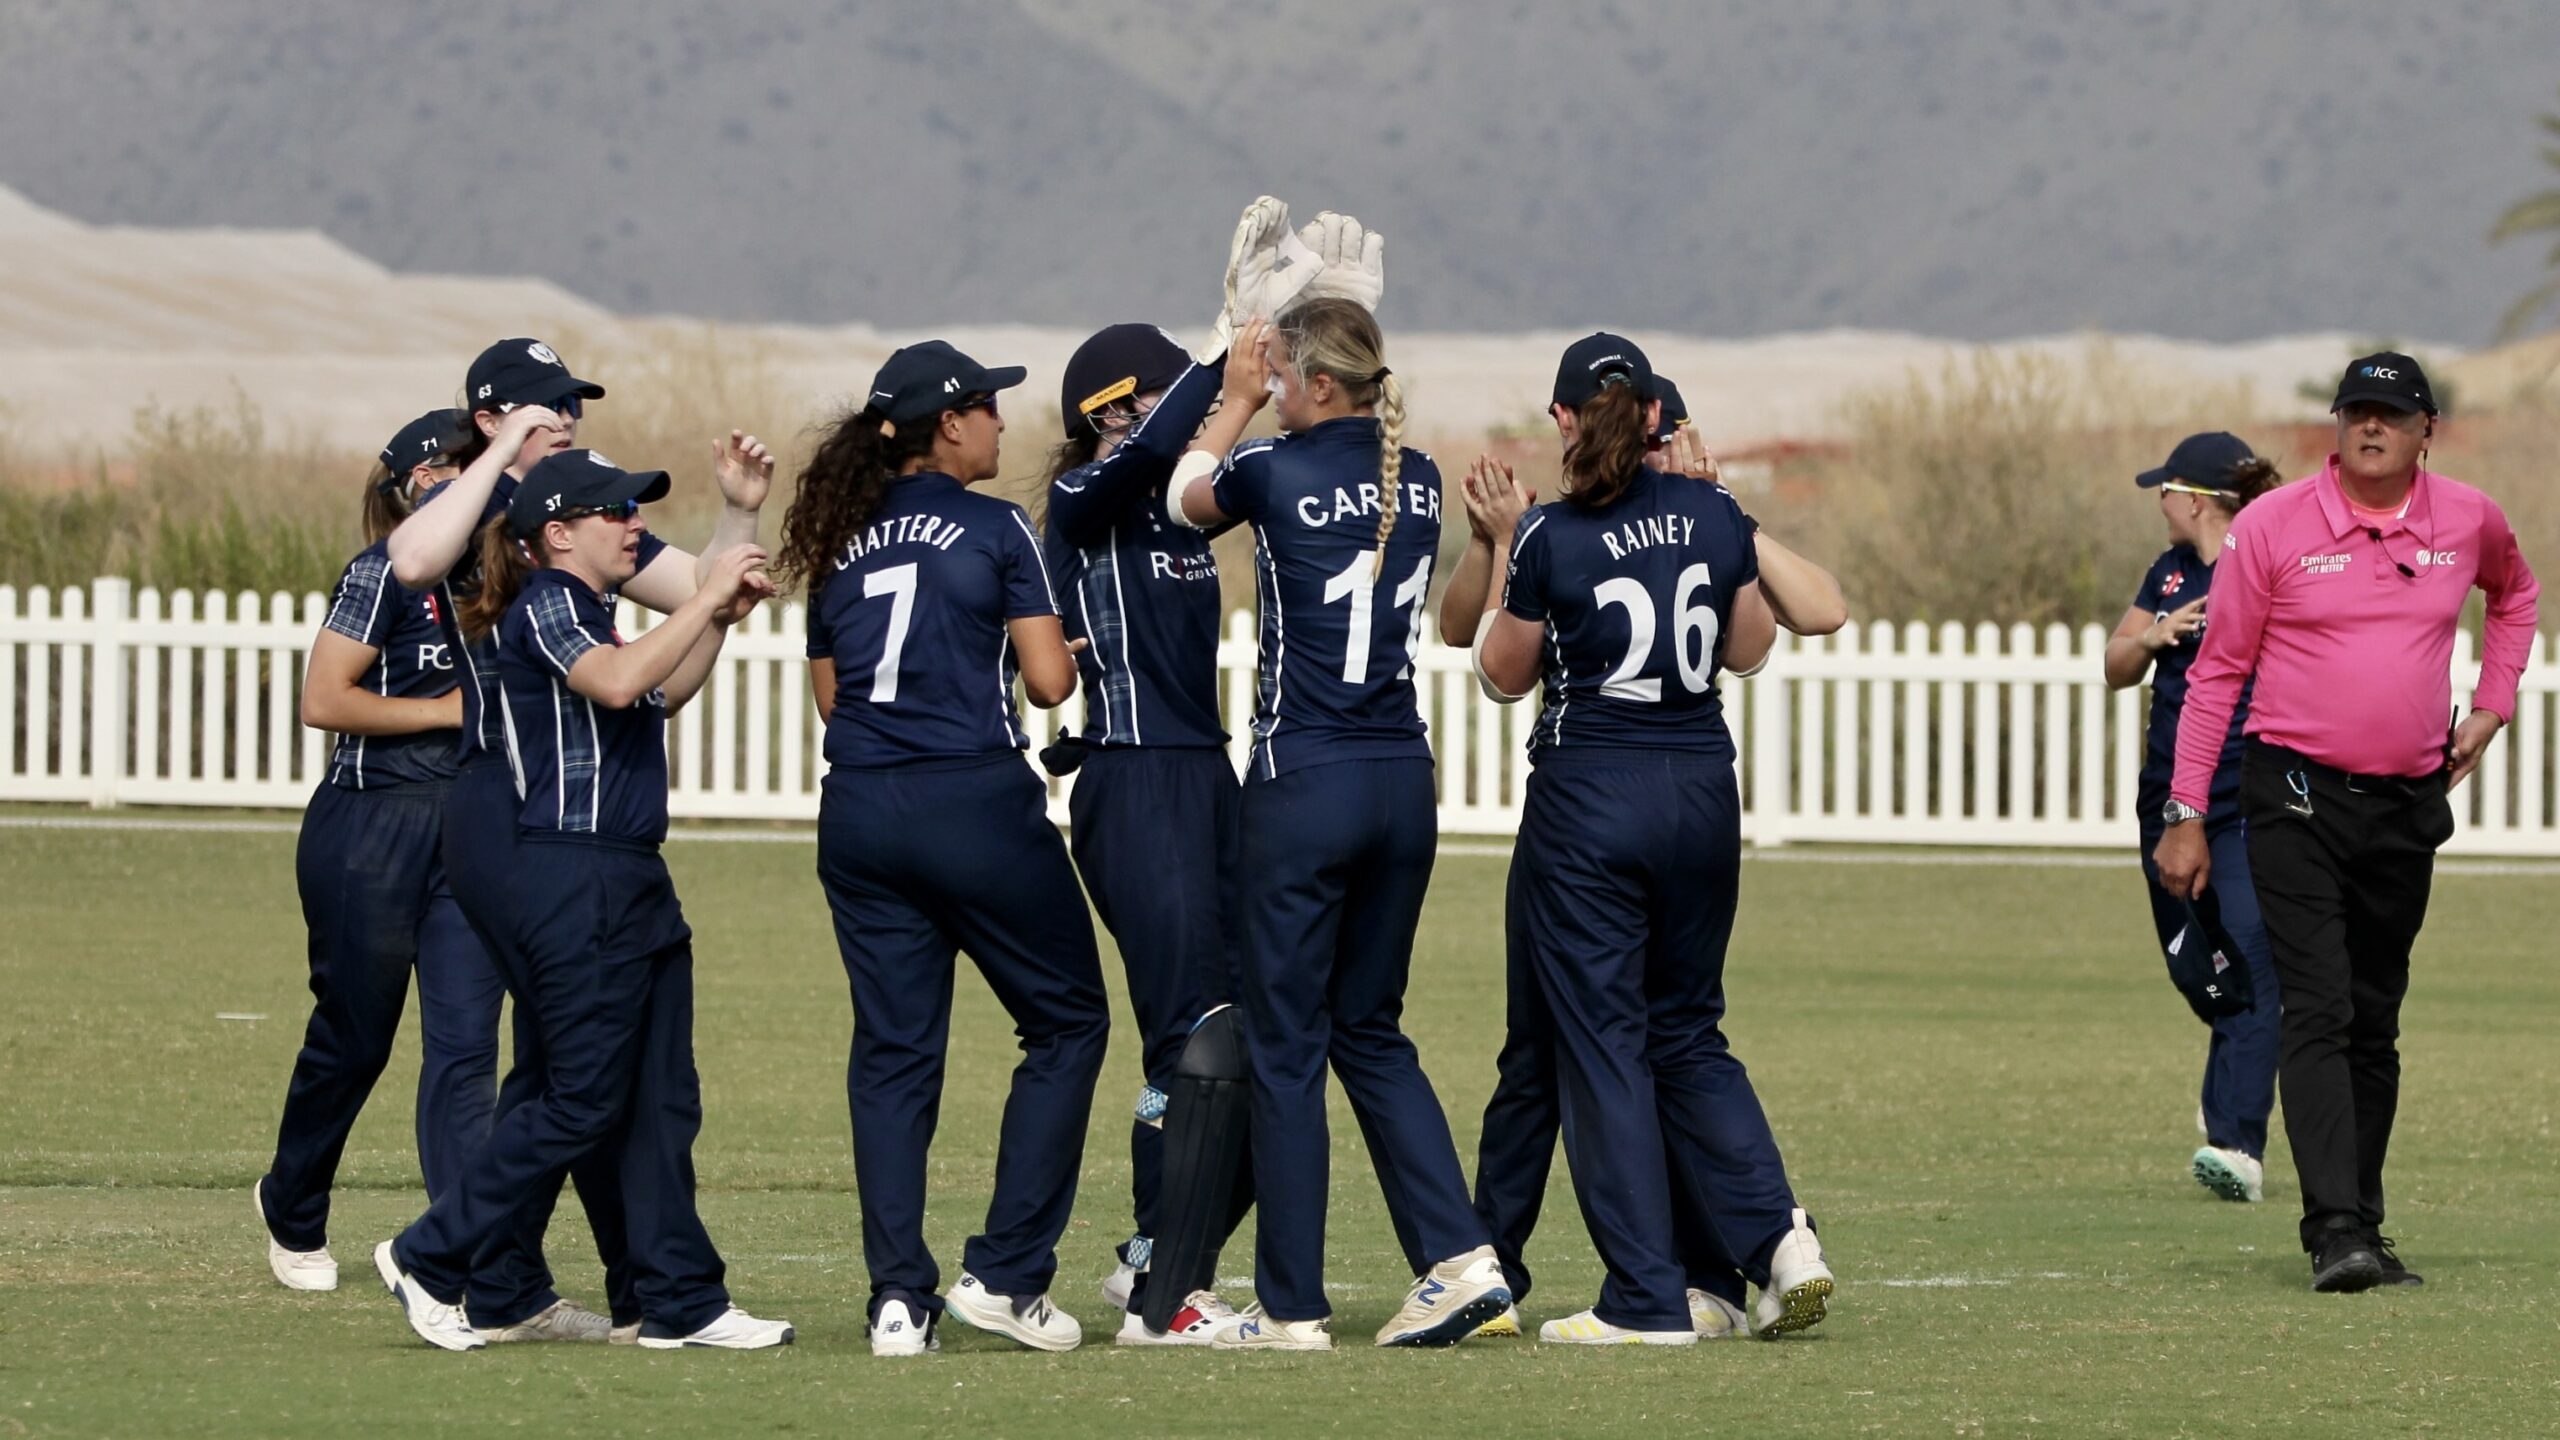 SCOTLAND WOMEN ADVANCE TO T20 WORLD CUP GLOBAL QUALIFIER